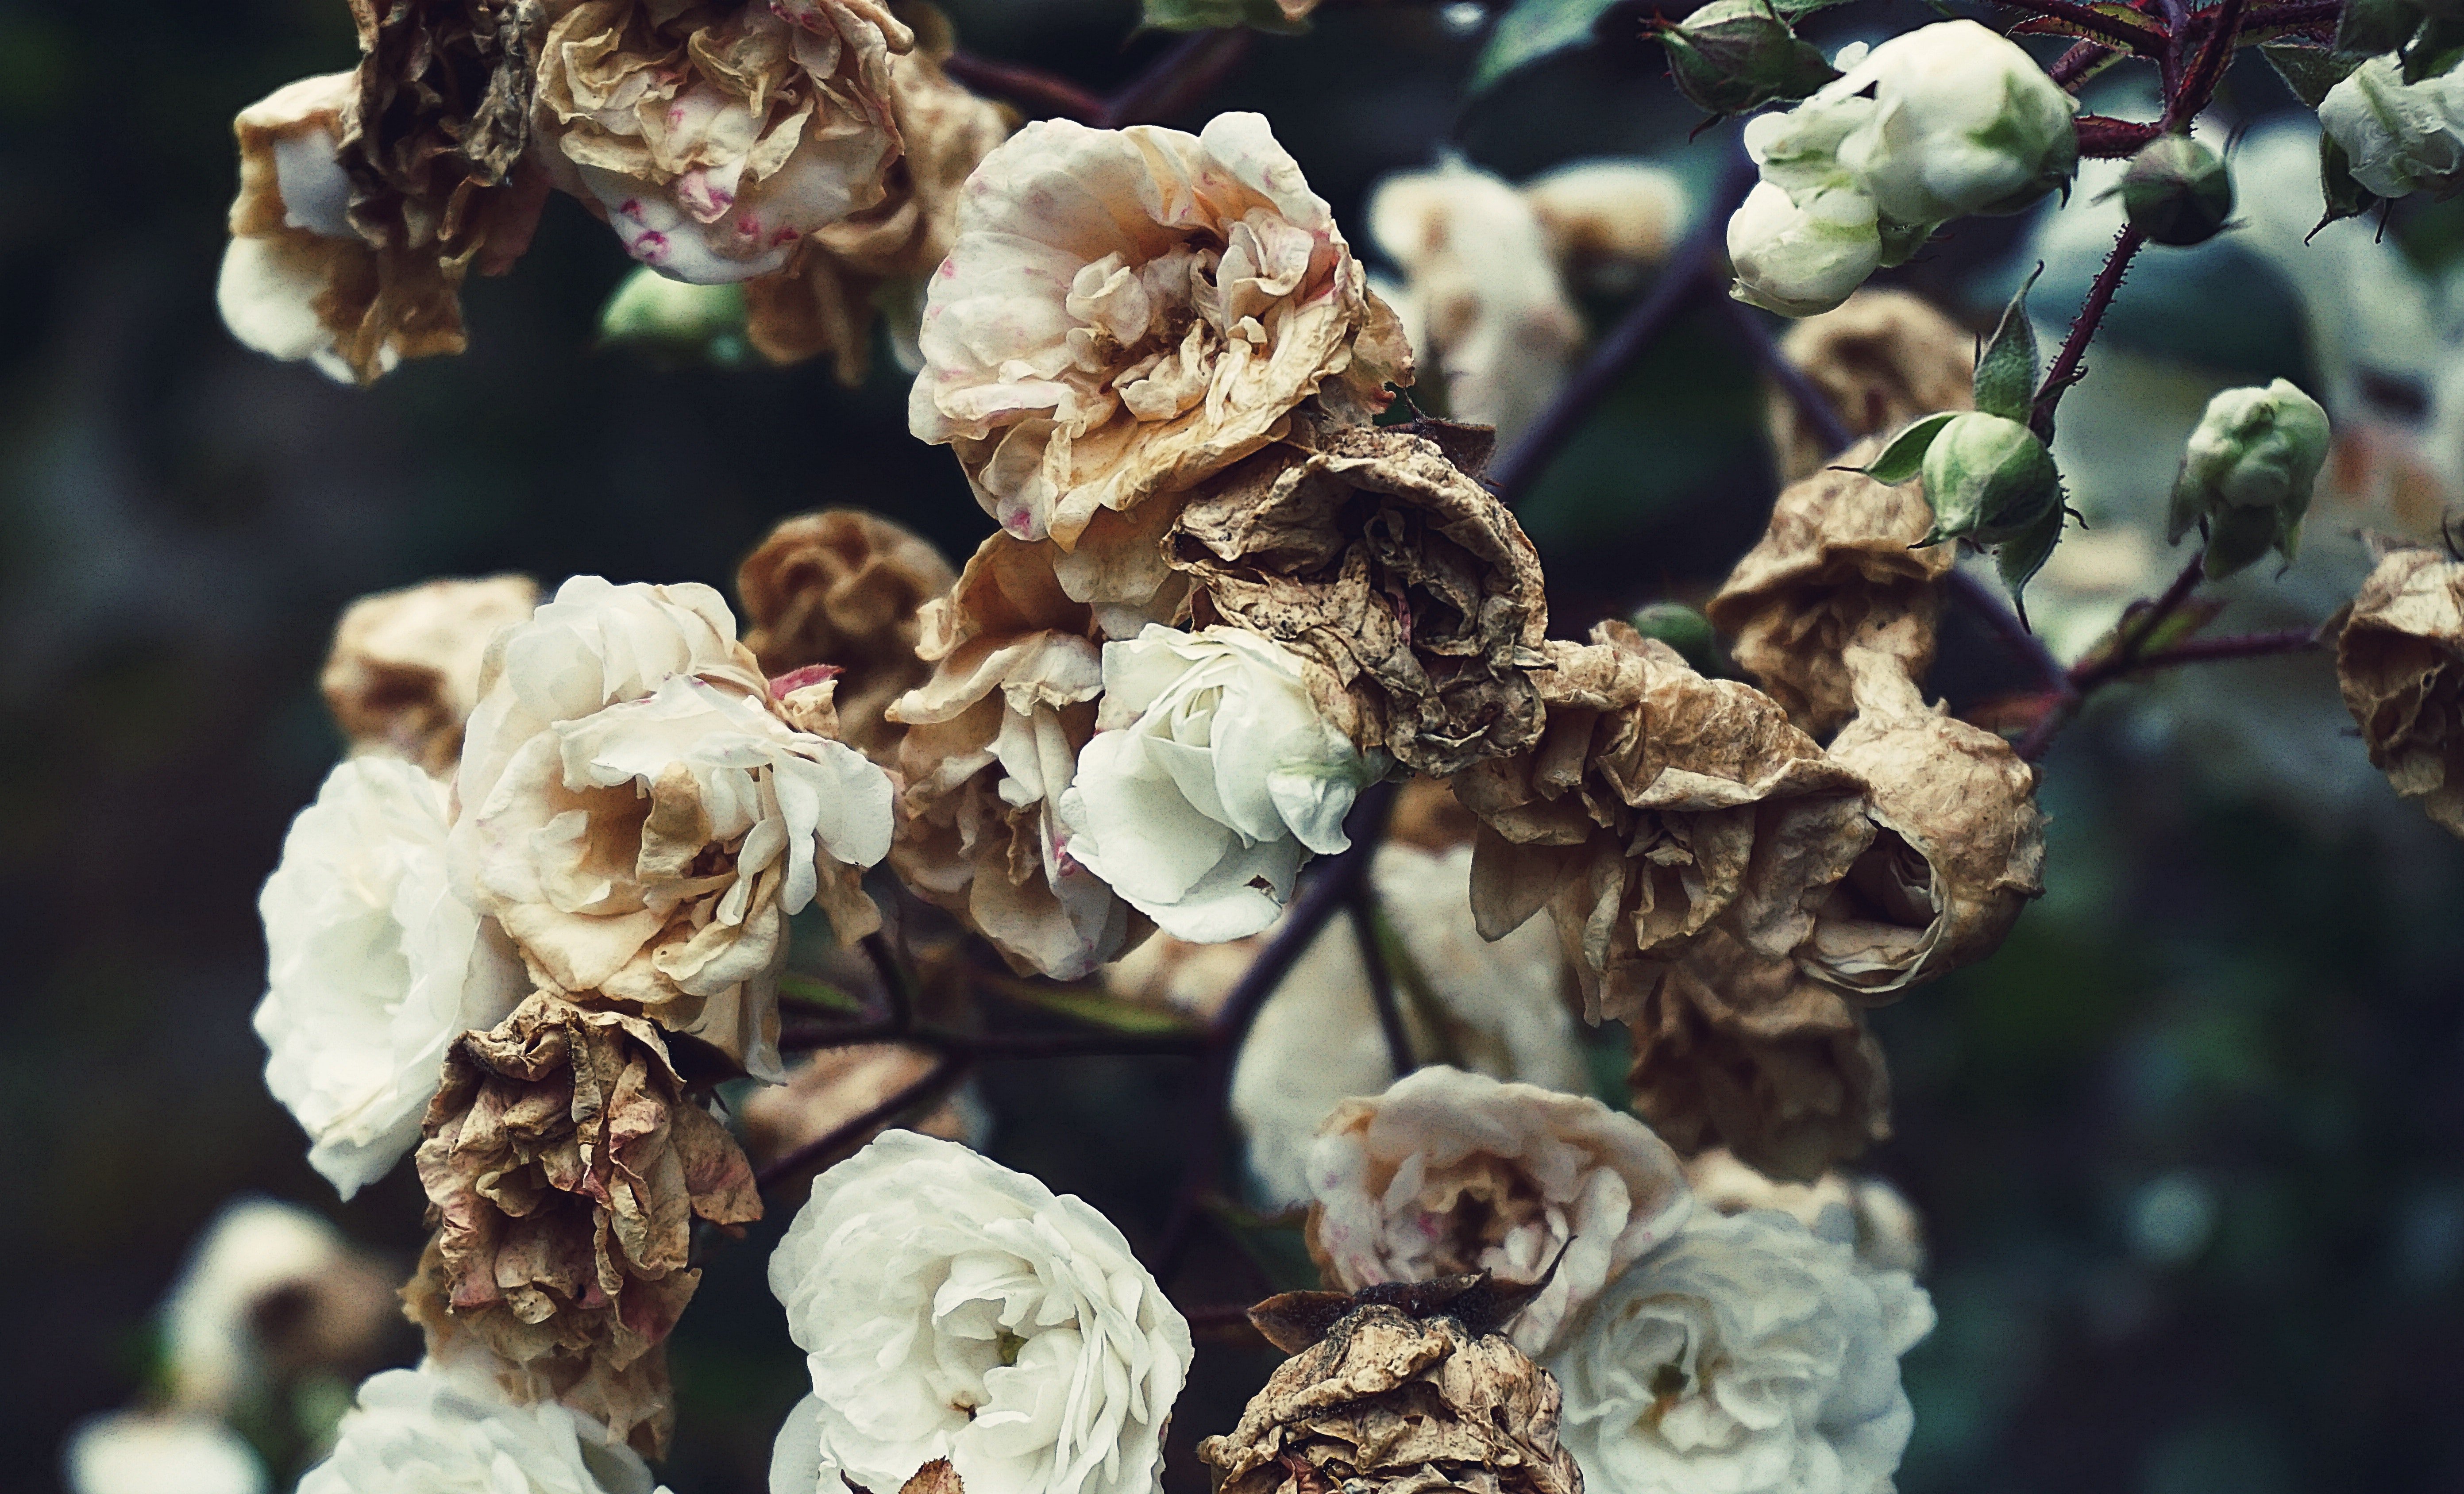 Emily asked about how her plants were doing, only to find out they withered. | Source: Pexels 